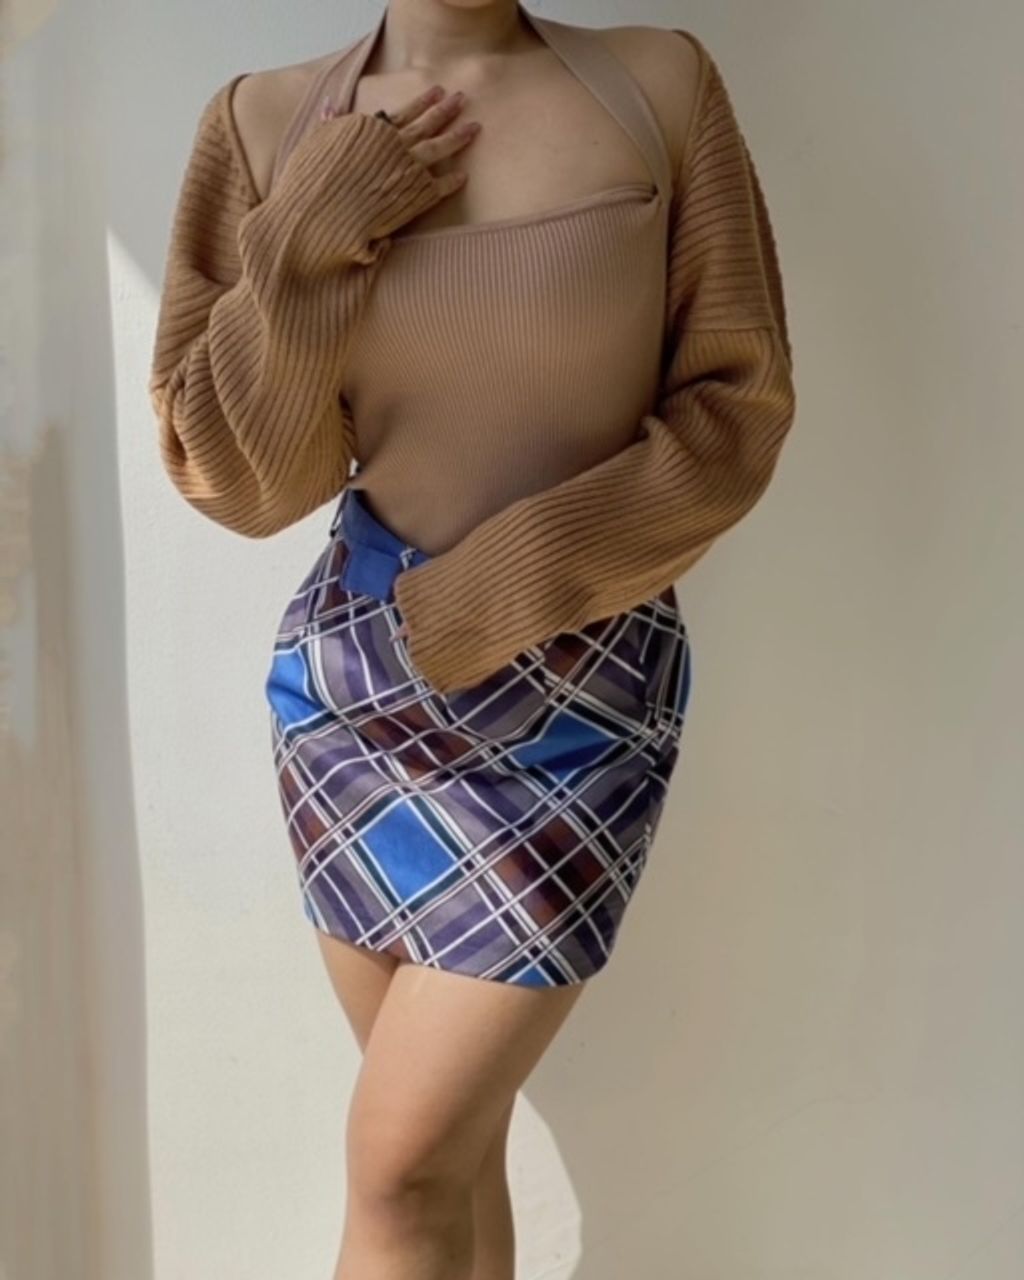 Angular Knit Top Brown with Brown knitted outer and Blue skirt